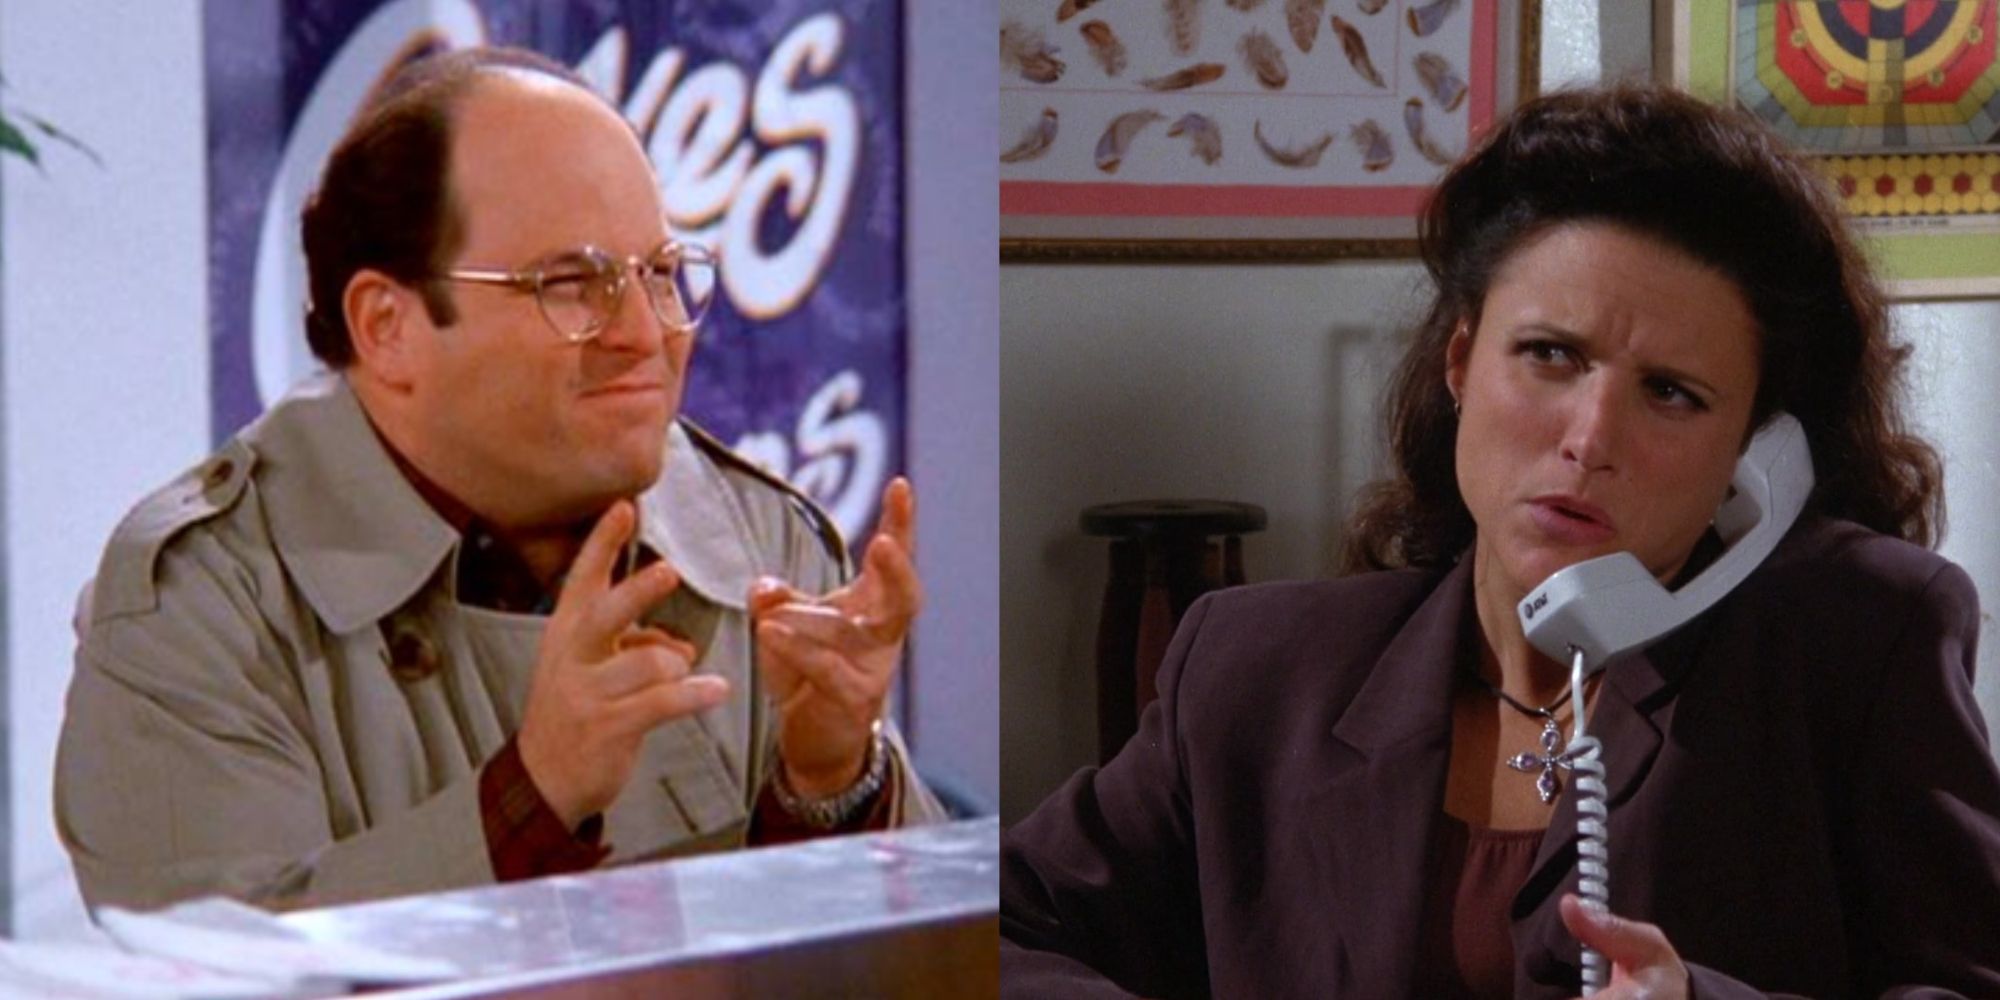 Split images of George looking angry and Elaine on the phone in Seinfeld